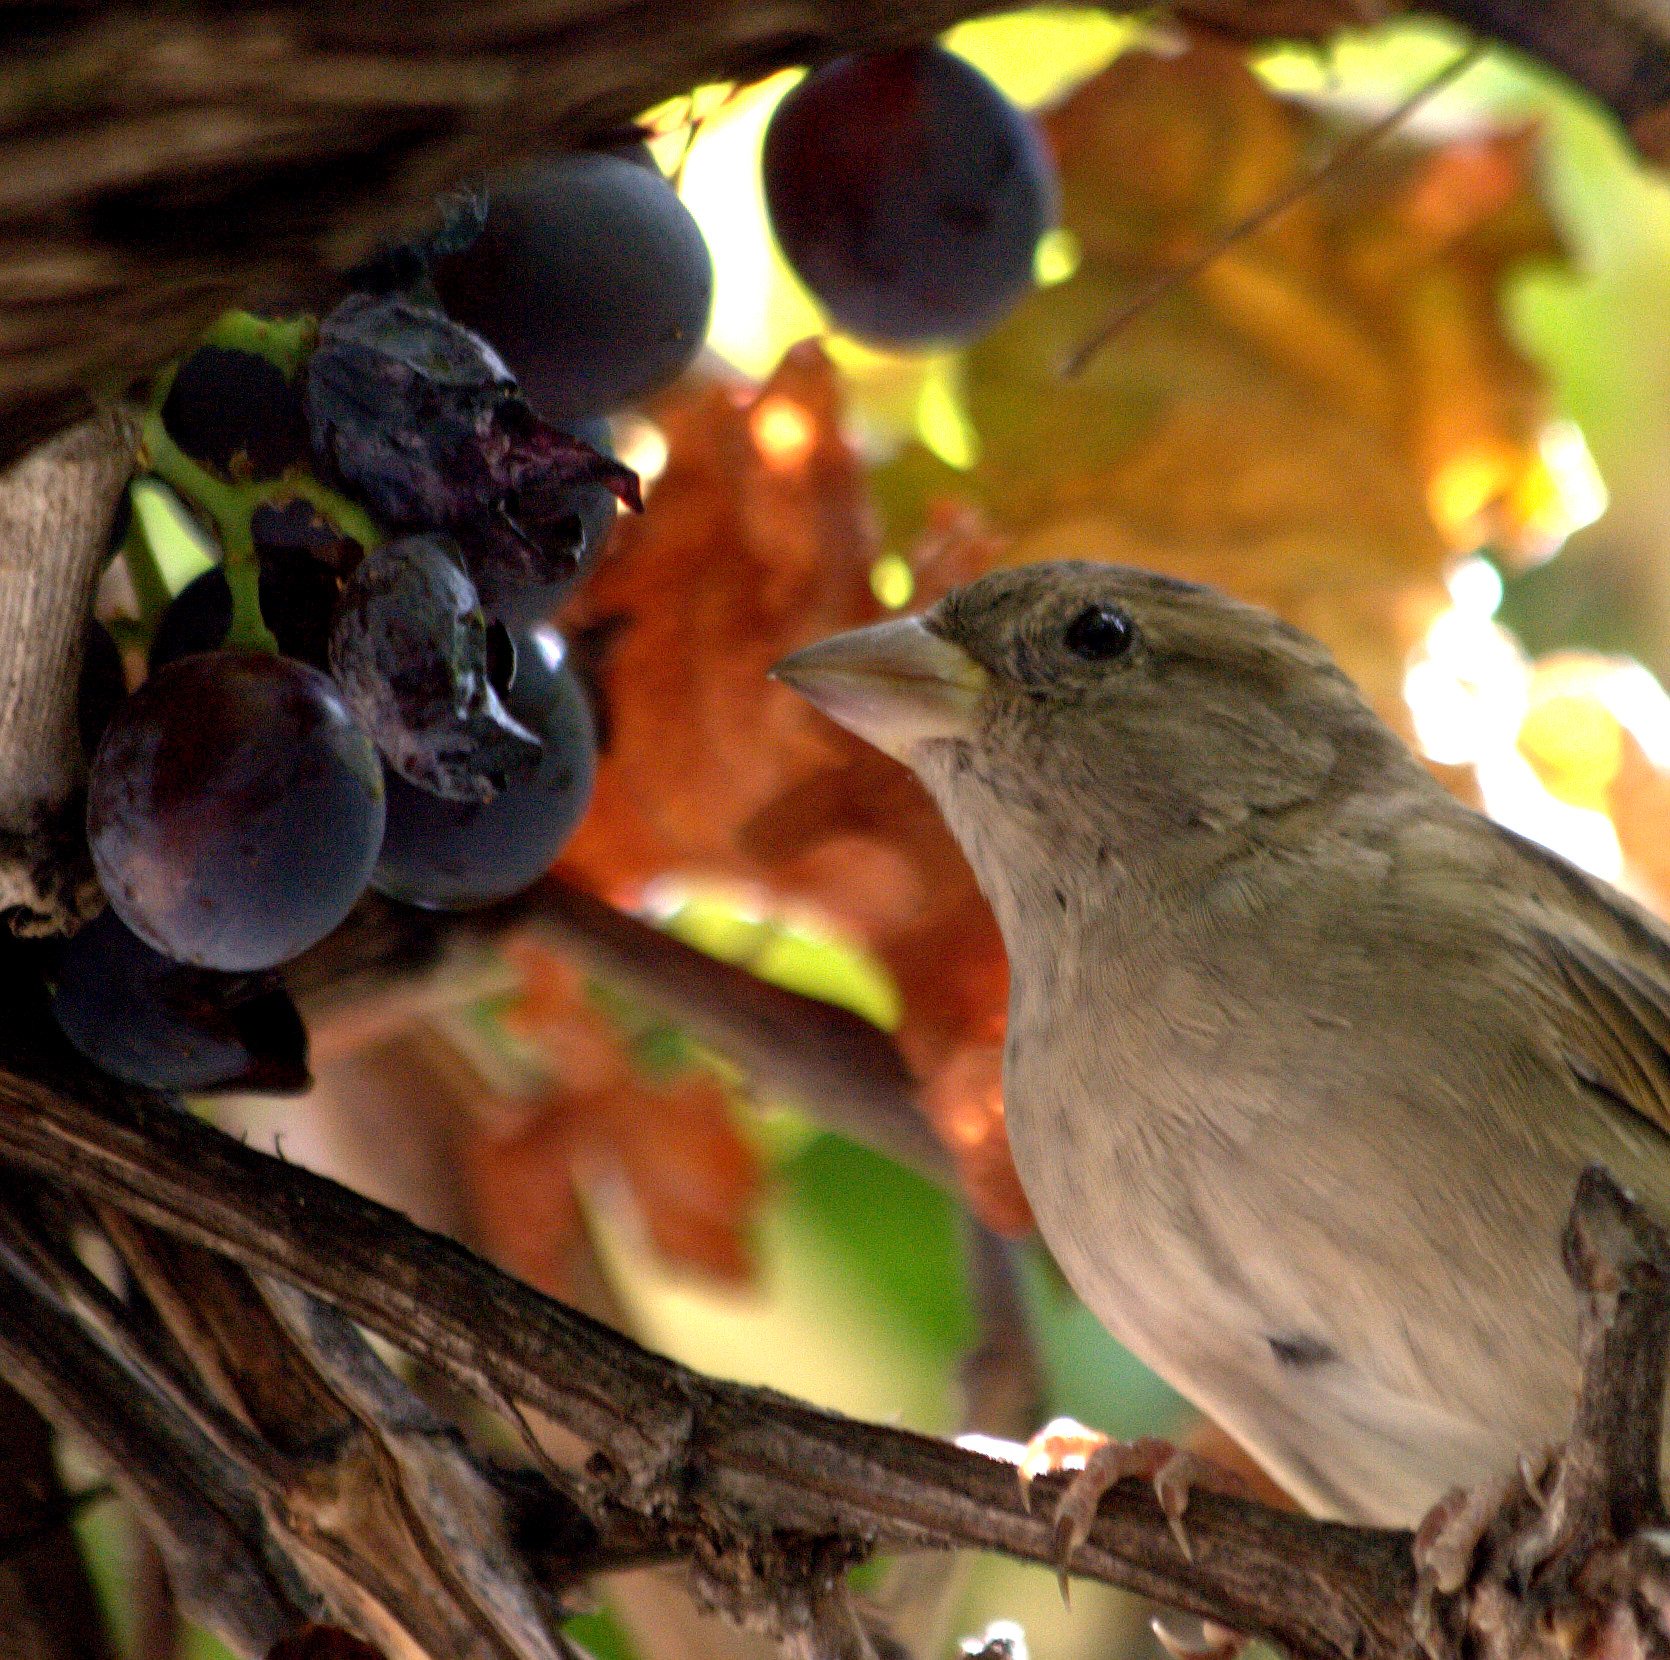 Sparrow and grapes. Cast grapes with sparrow, in return eliminates insects.